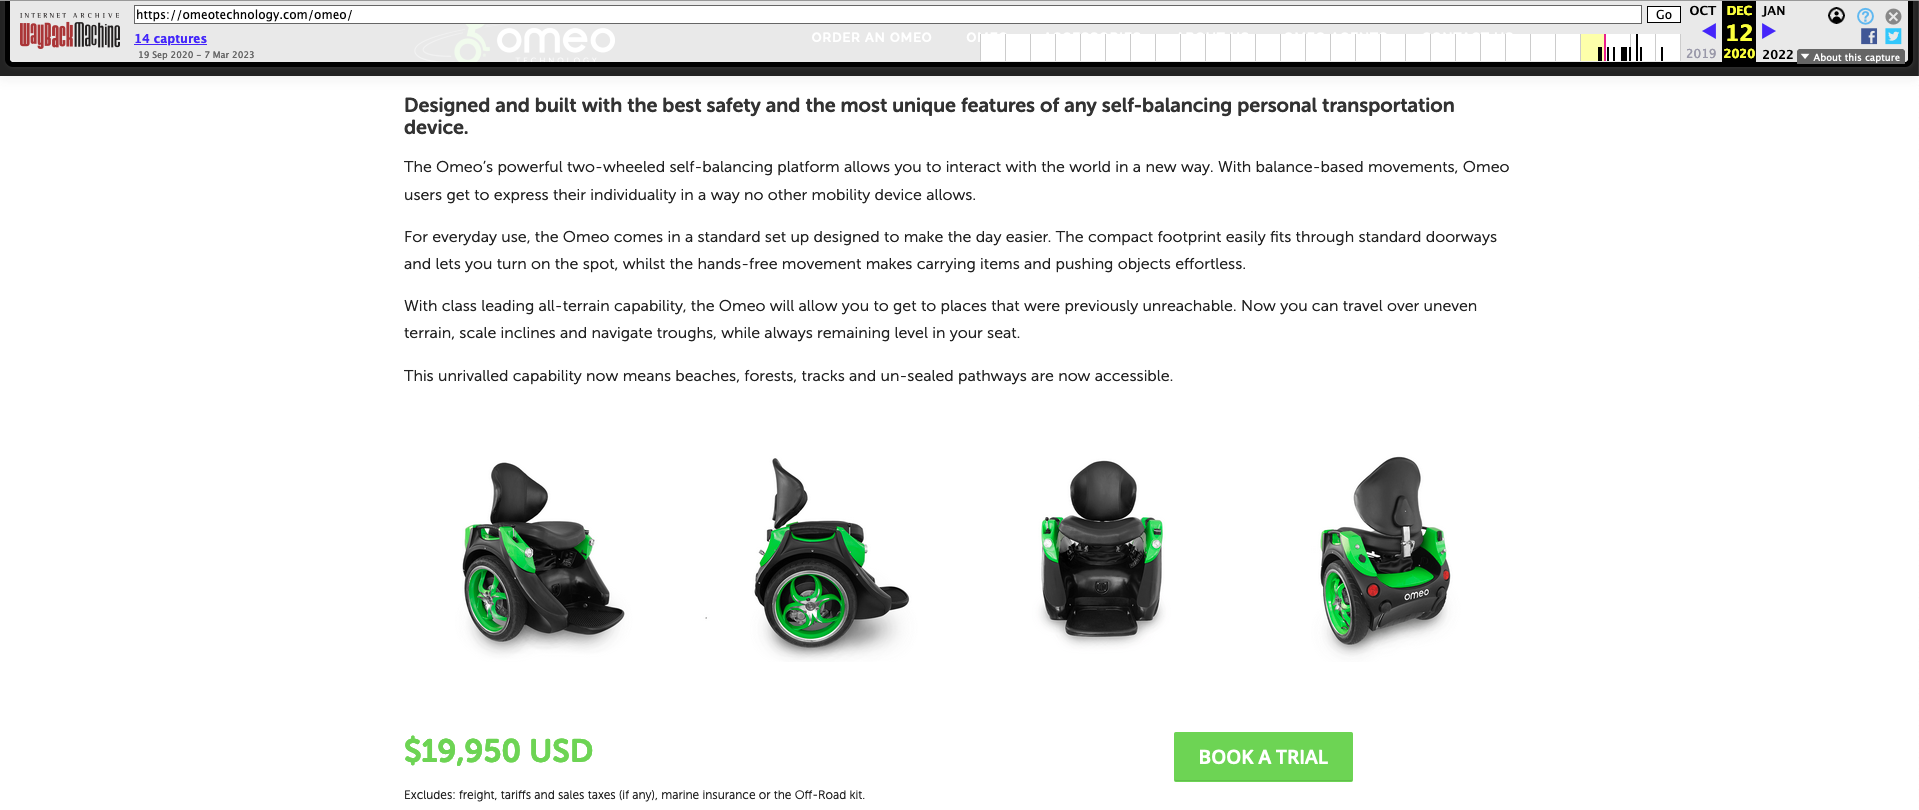 A screenshot of the Omeo Technology website showing the price listed as $19,950 USD